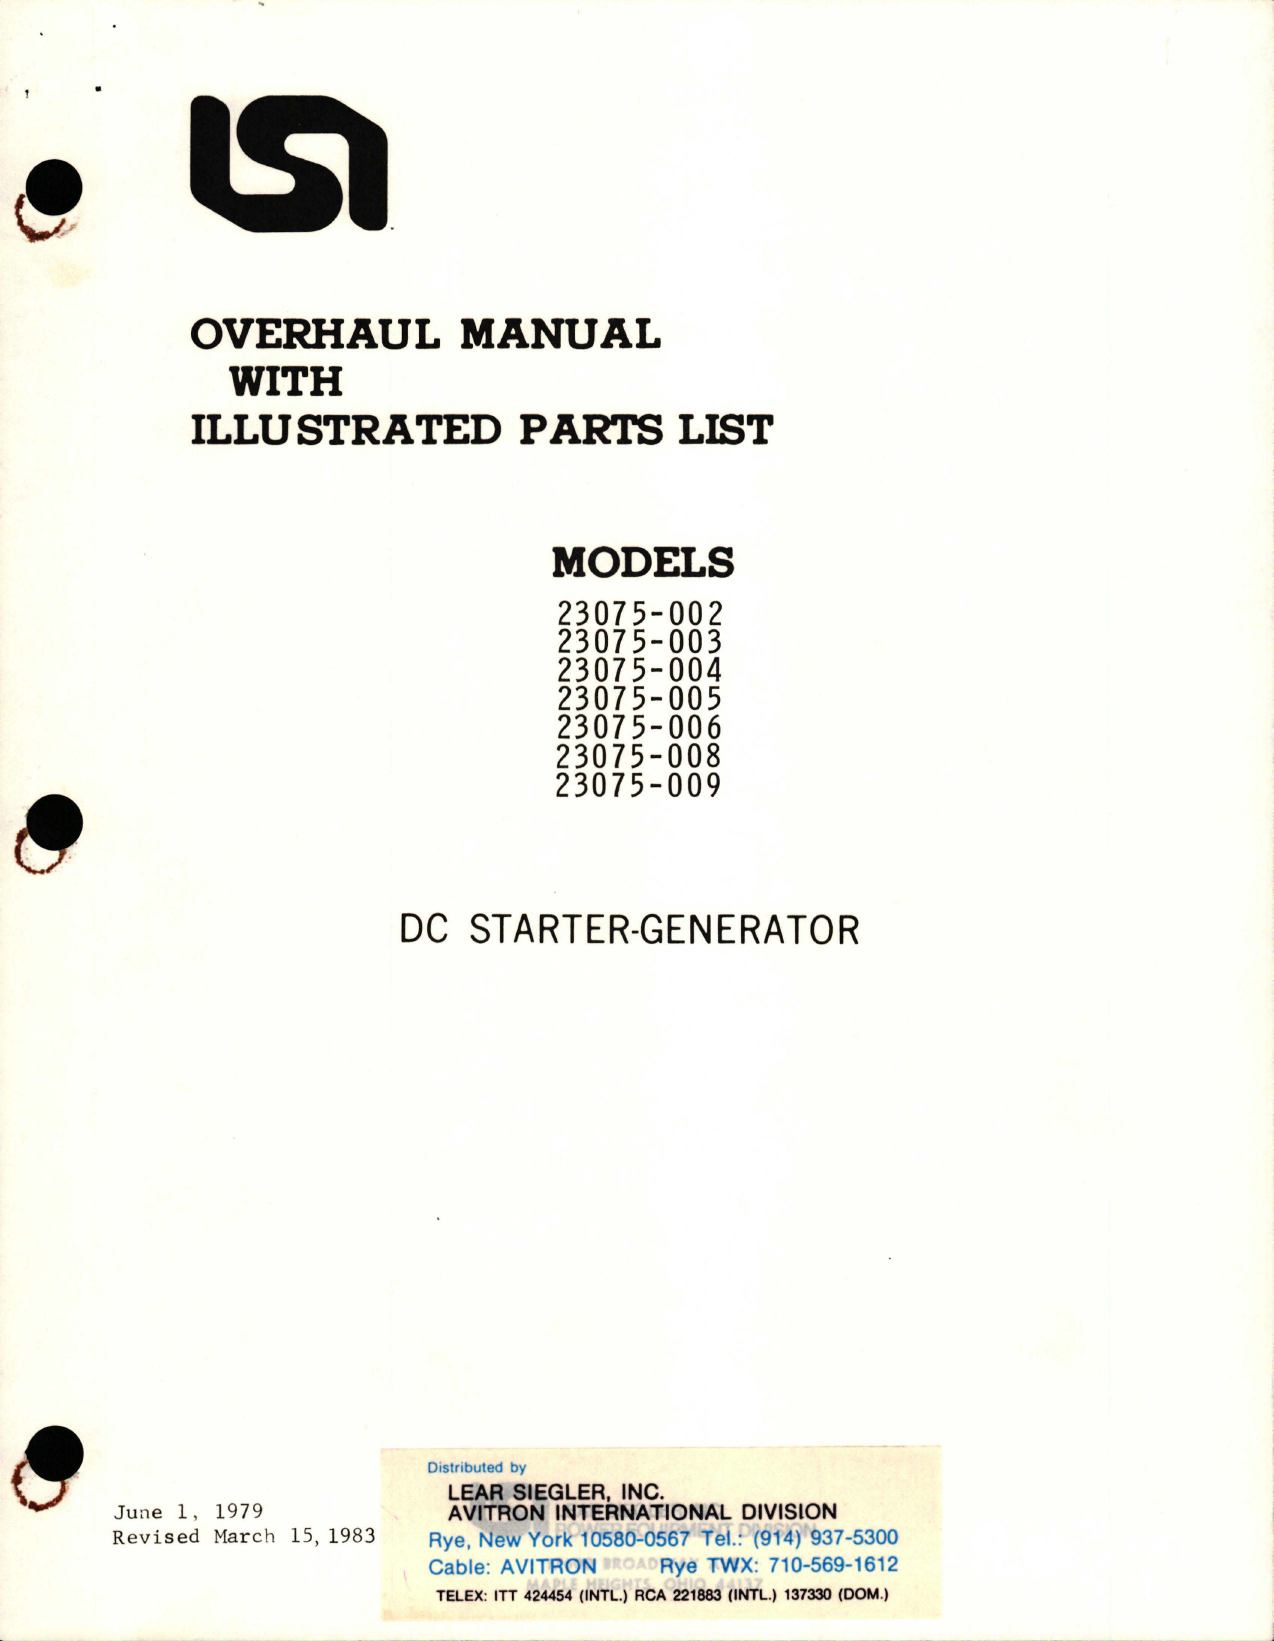 Sample page 1 from AirCorps Library document: Overhaul Manual with Illustrated Parts List for DC Starter-Generator